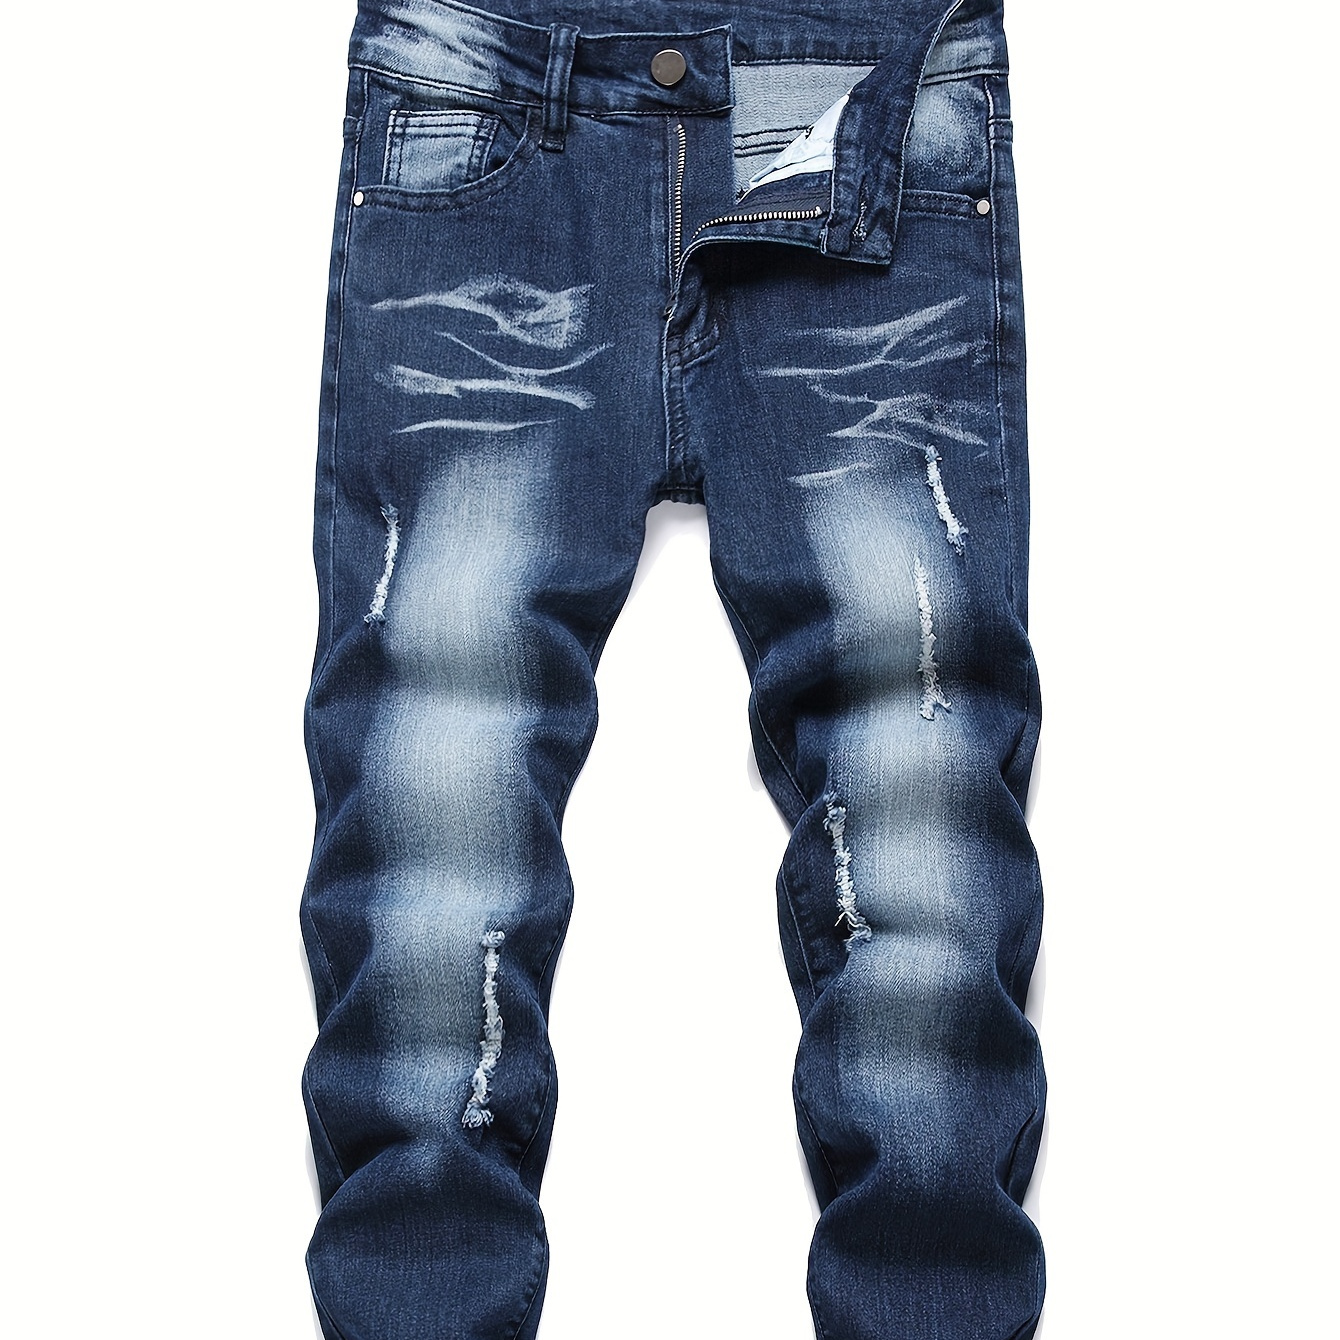 

Kid's Ripped Denim Pants, Slim Fit Jeans With Pocket, Boy's Clothes For Spring Fall Winter